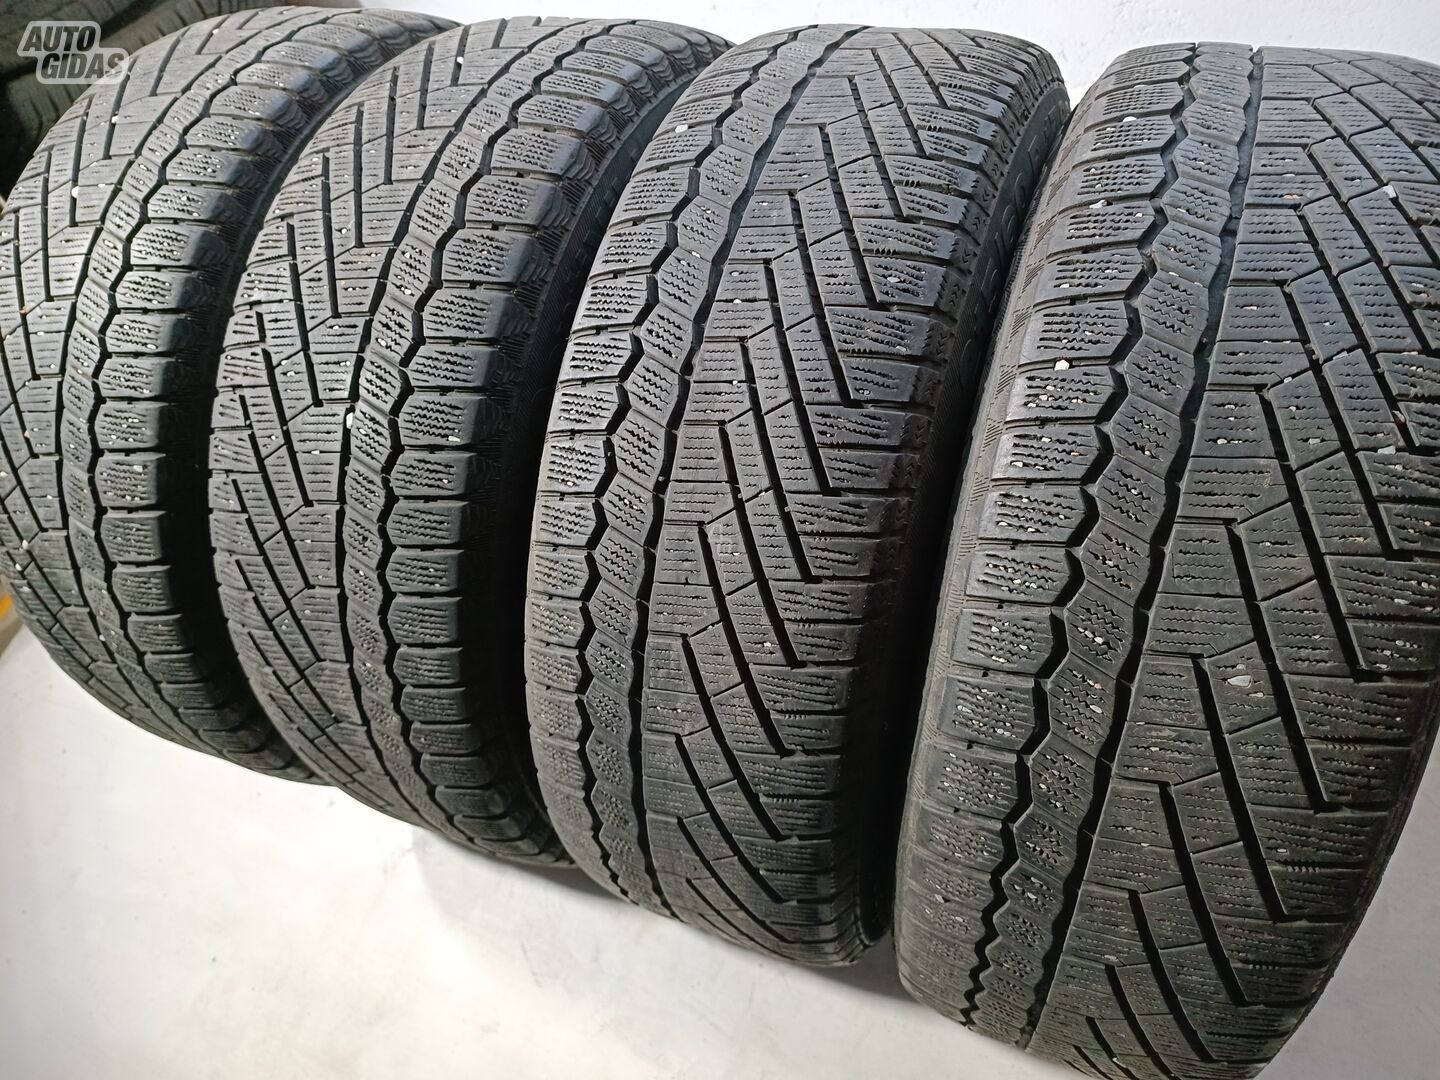 Continental 5-6mm R17 winter tyres passanger car